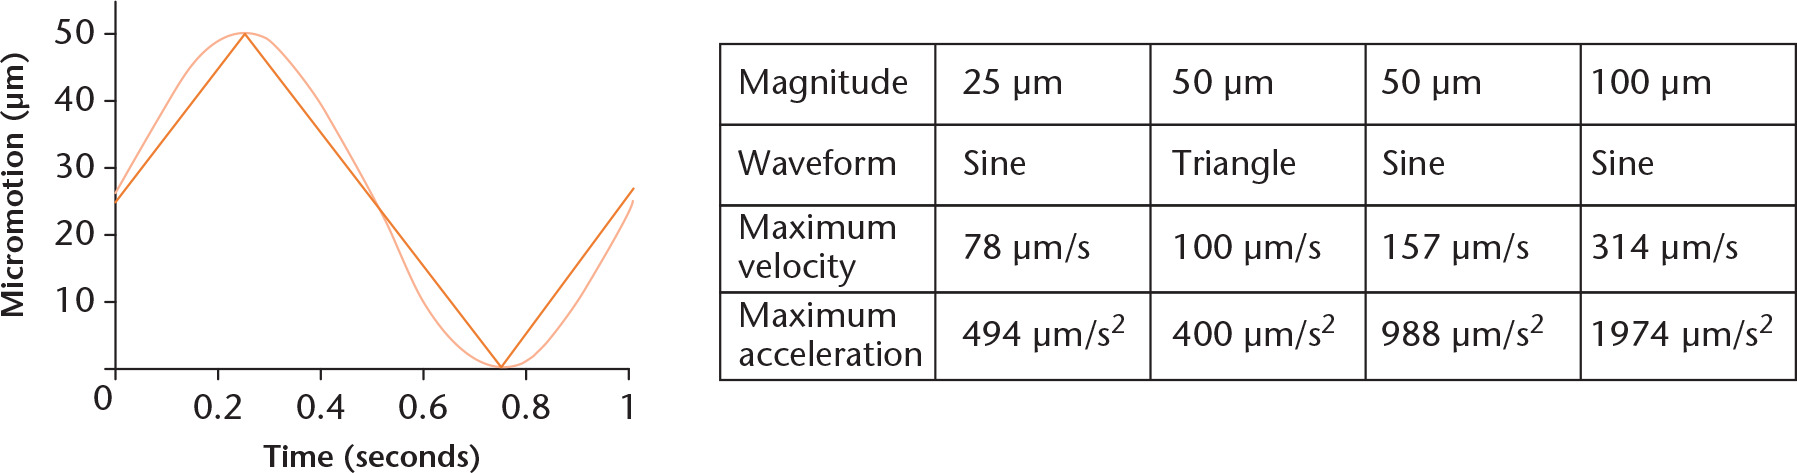 Fig. 2 
            Characteristics of applied micromotions. Depiction of a 50 µm sine (light orange function) and 50 µm triangle (dark orange function) micromotion applied with 1 Hz frequency. The table shows the maximum velocity and maximum acceleration of the applied micromotions resulting from the magnitude and waveform of the micromotions applied with 1 Hz frequency.
          